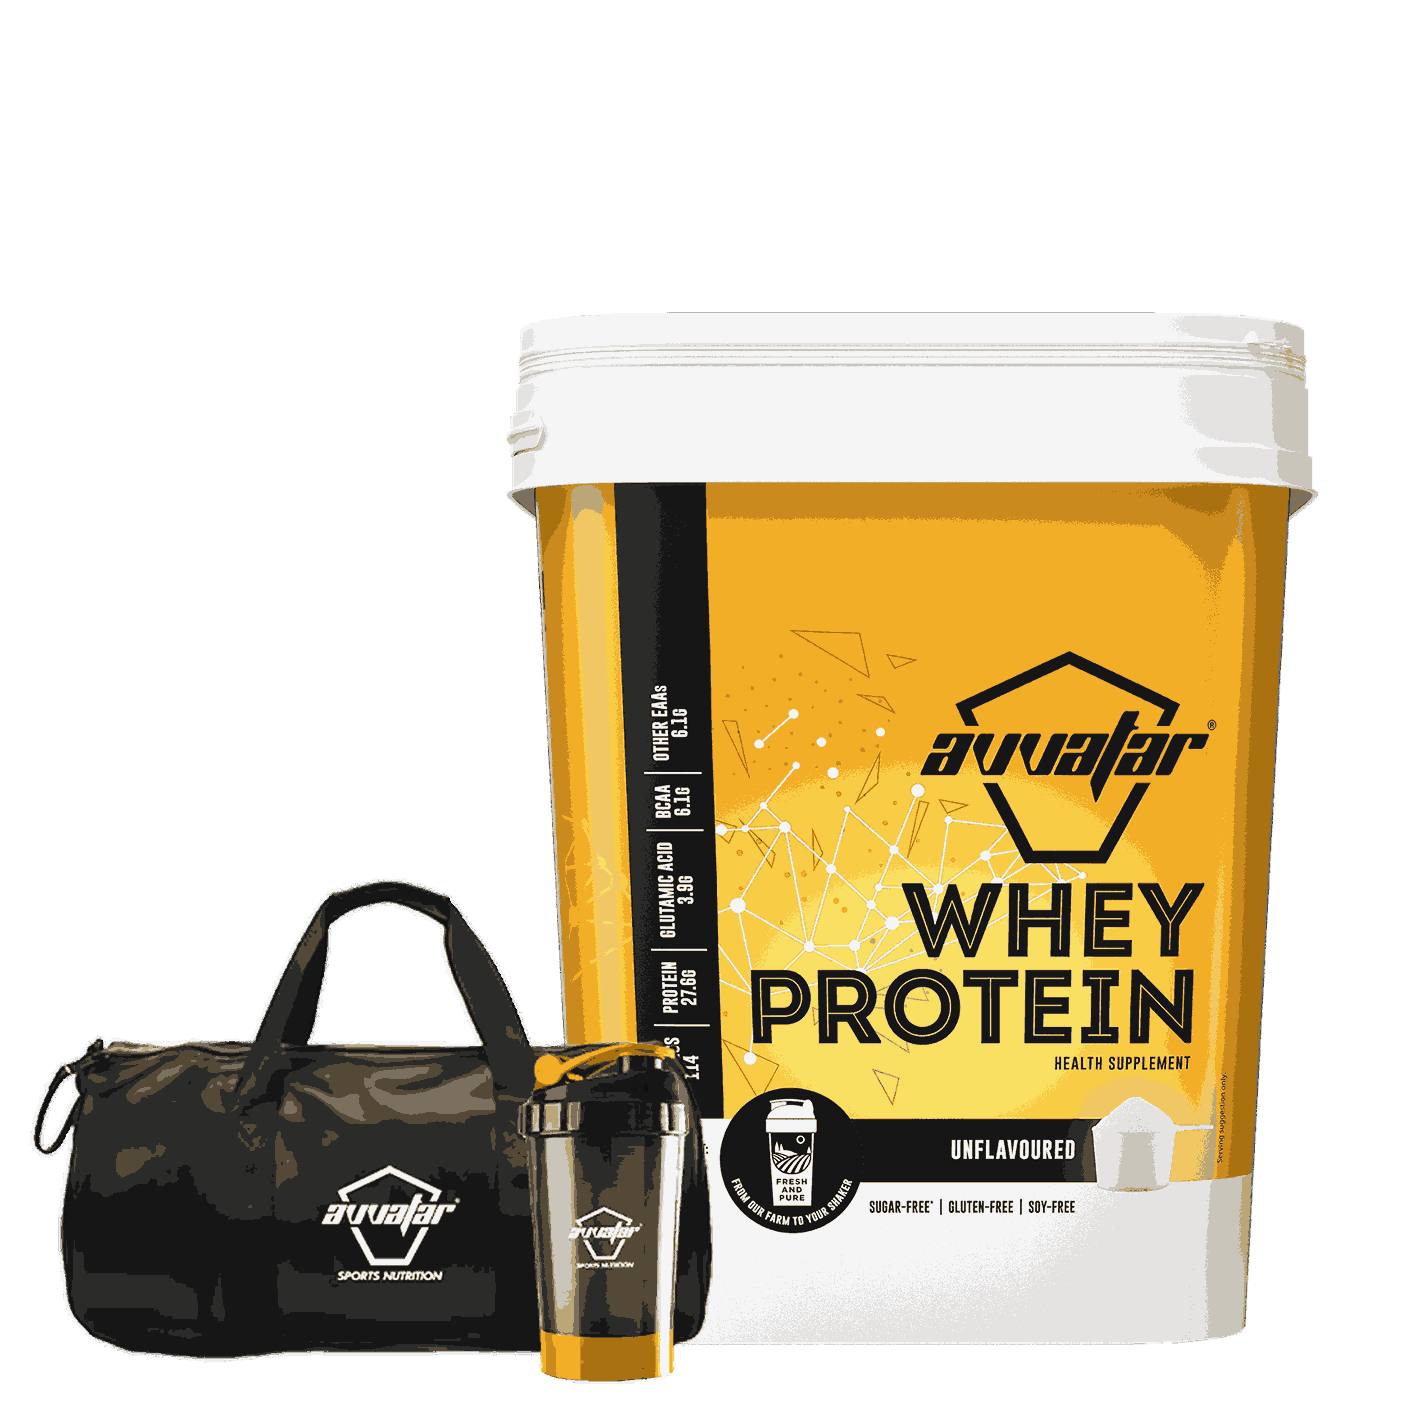 Fuel your workouts with high-quality 4kg raw unflavoured whey protein from Avvatar India. Premium protein source for fitness enthusiasts. Order now!